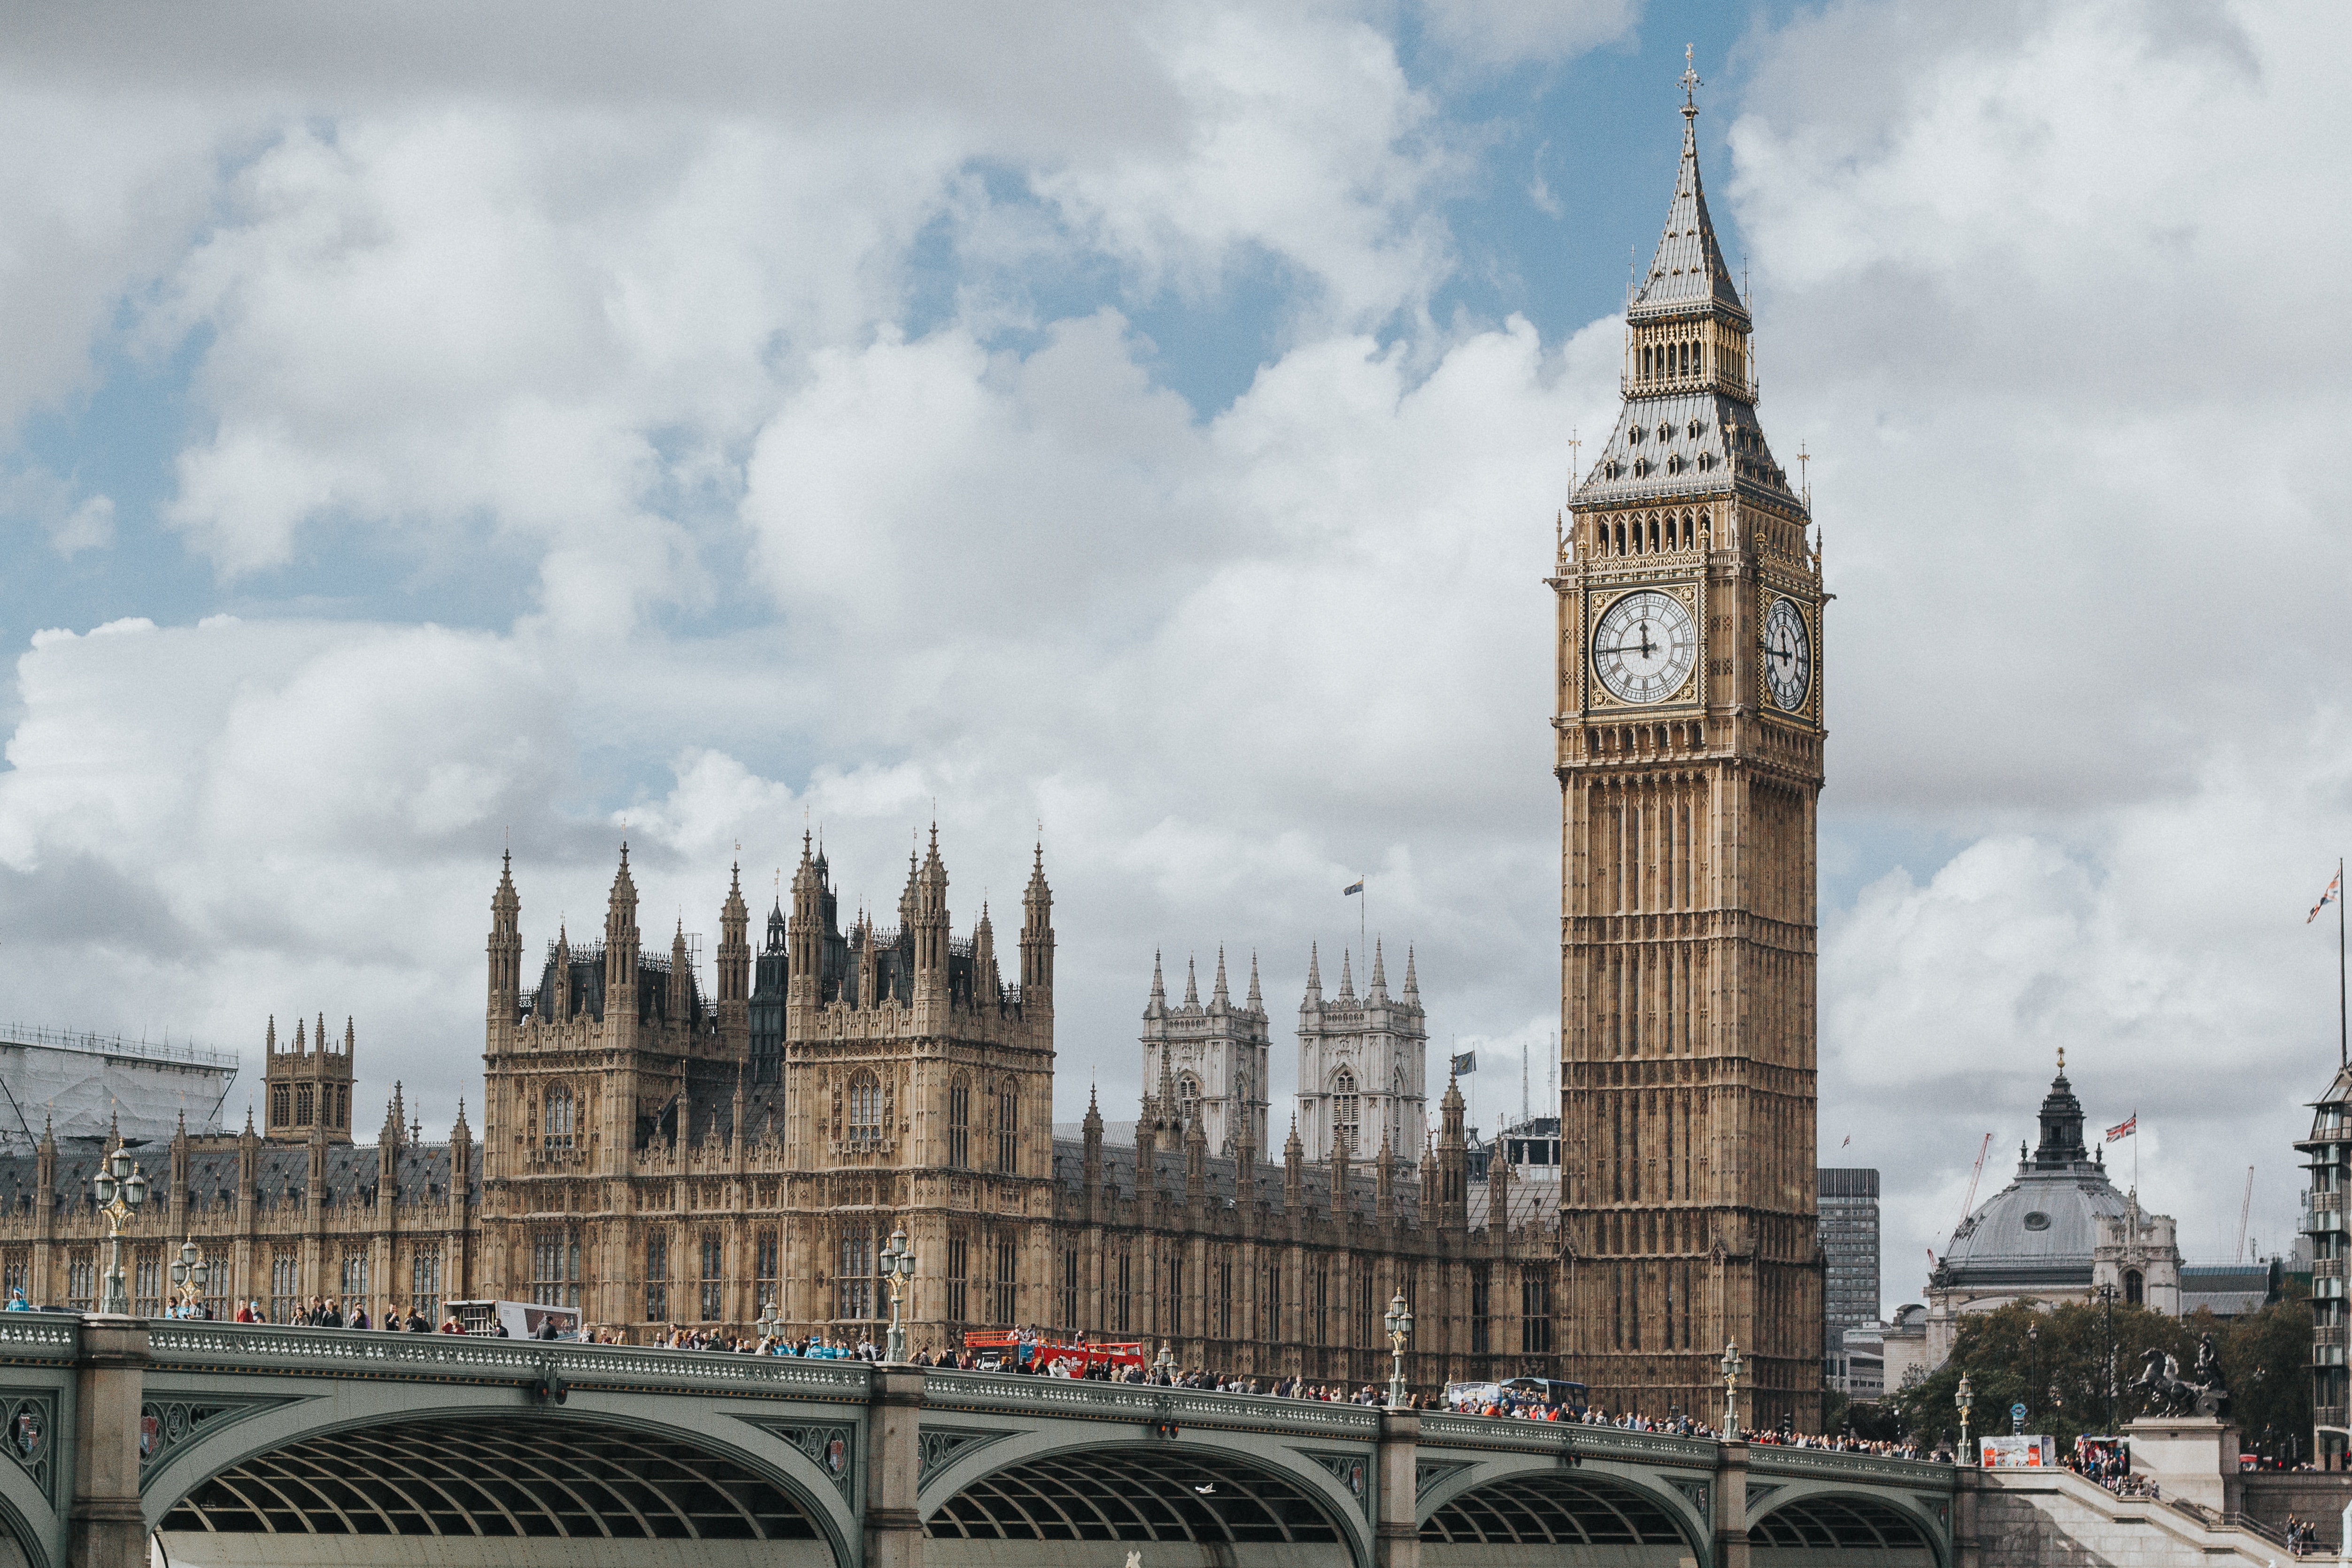 An image of the Big Ben clocktower and other iconic buildings and a bridge in London. Clouds appear in the skyline.